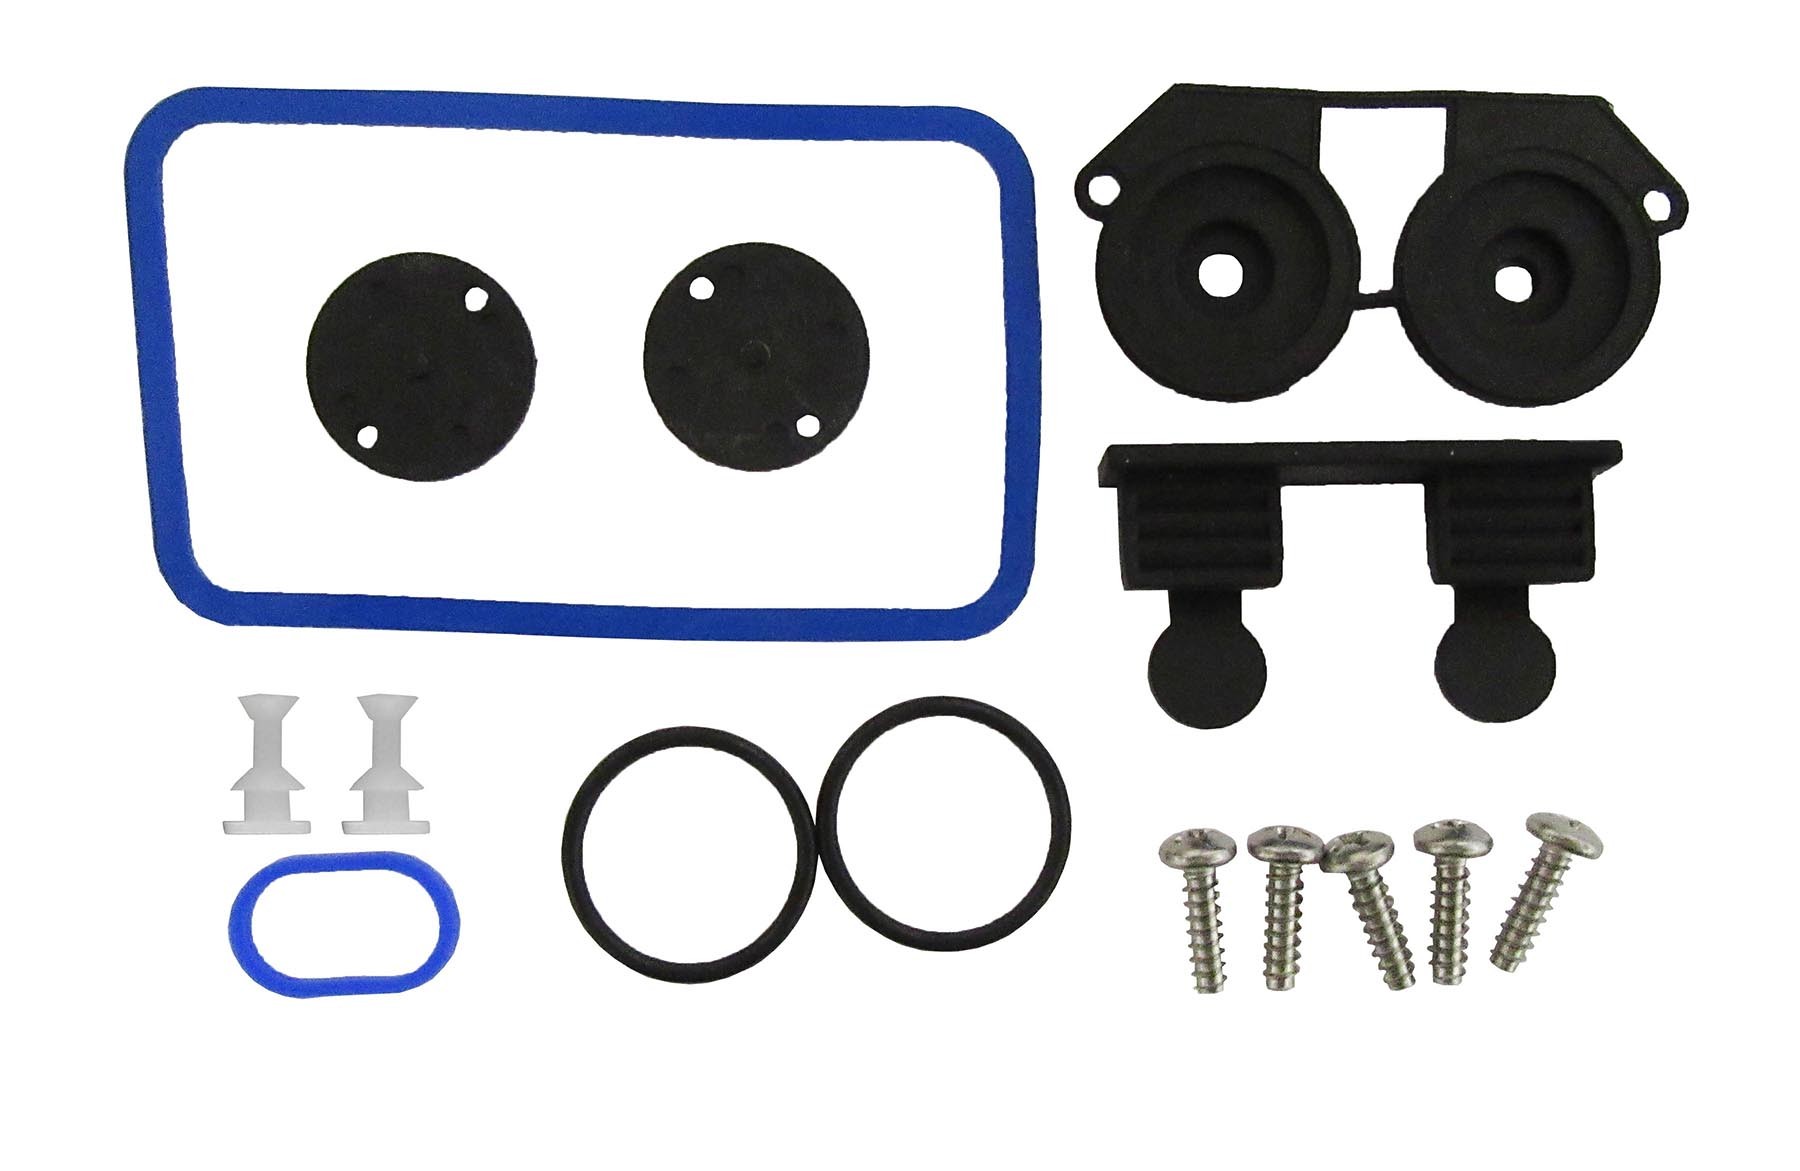 Replacement 15 piece repair kit for new style Delatron